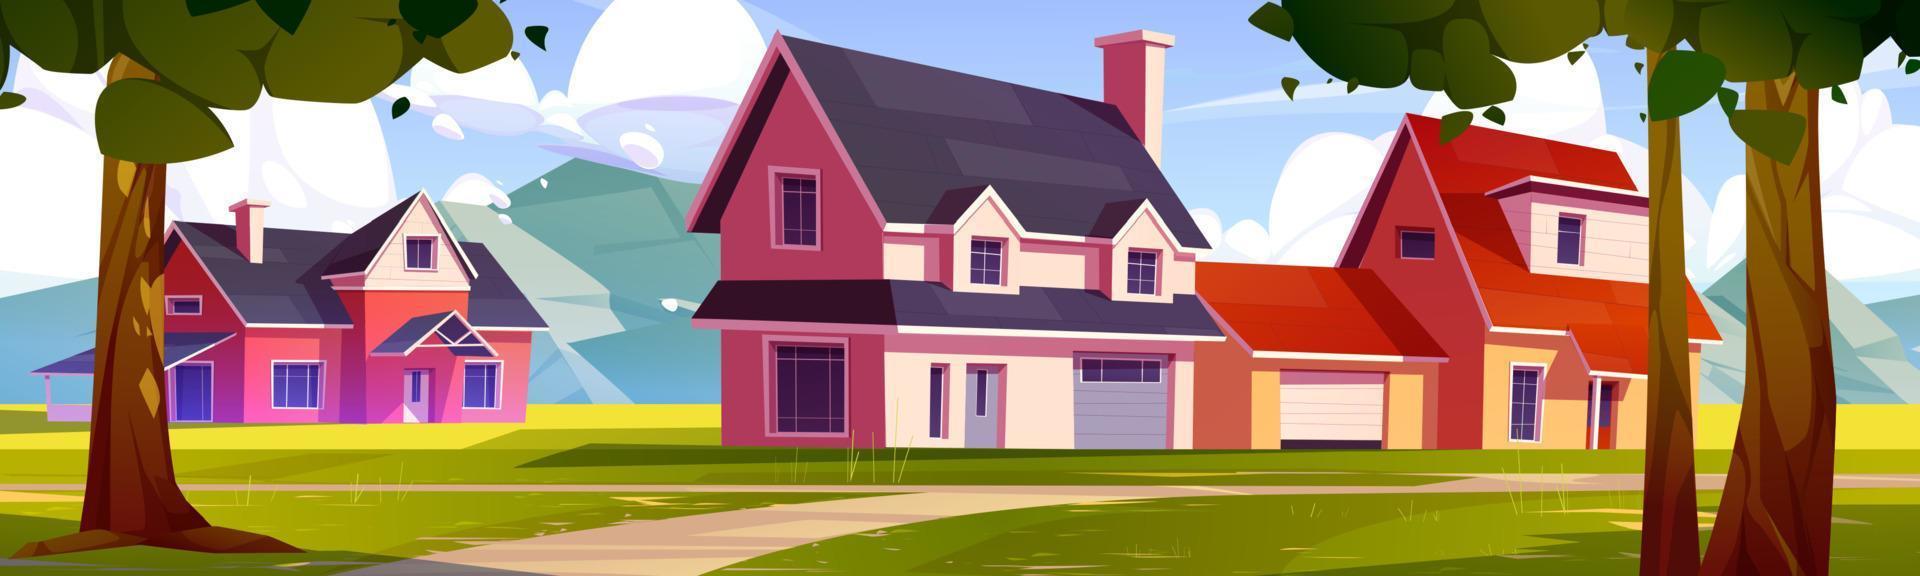 Countryside houses in mountain valley vector